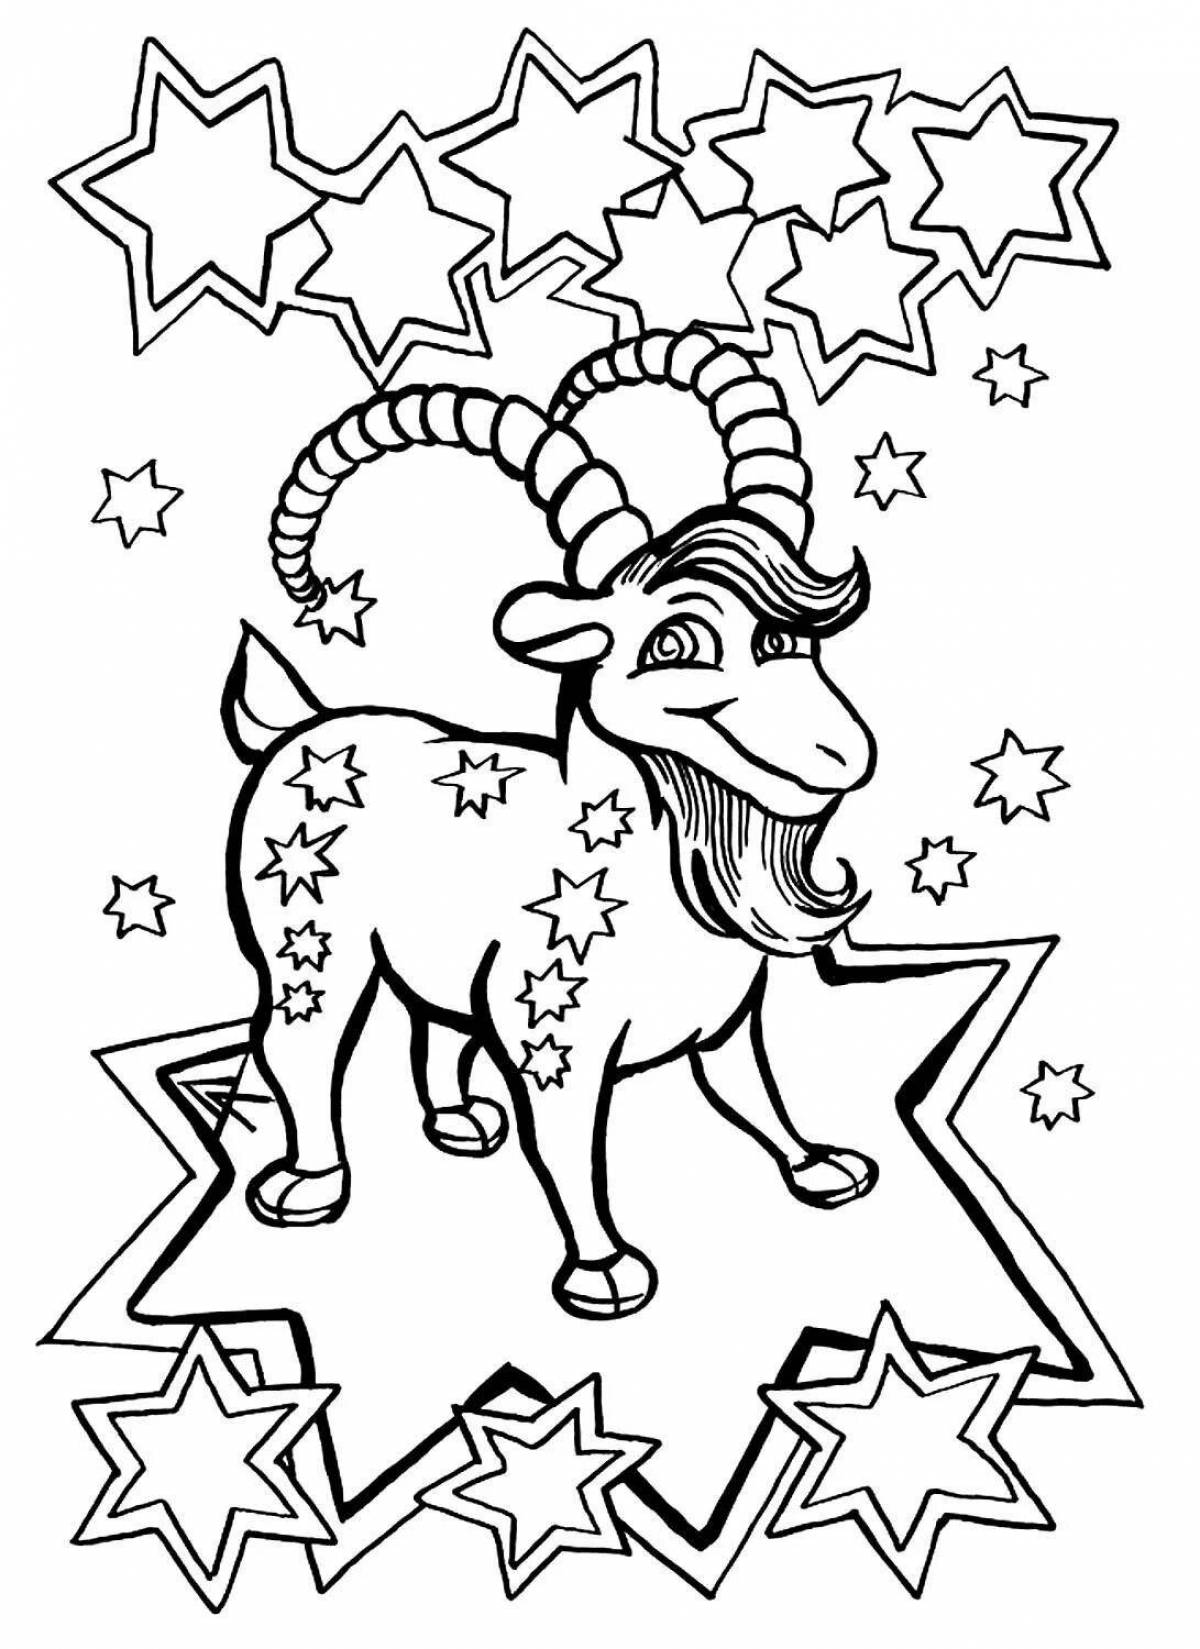 Colorful coloring pages with zodiac signs to develop the imagination of children